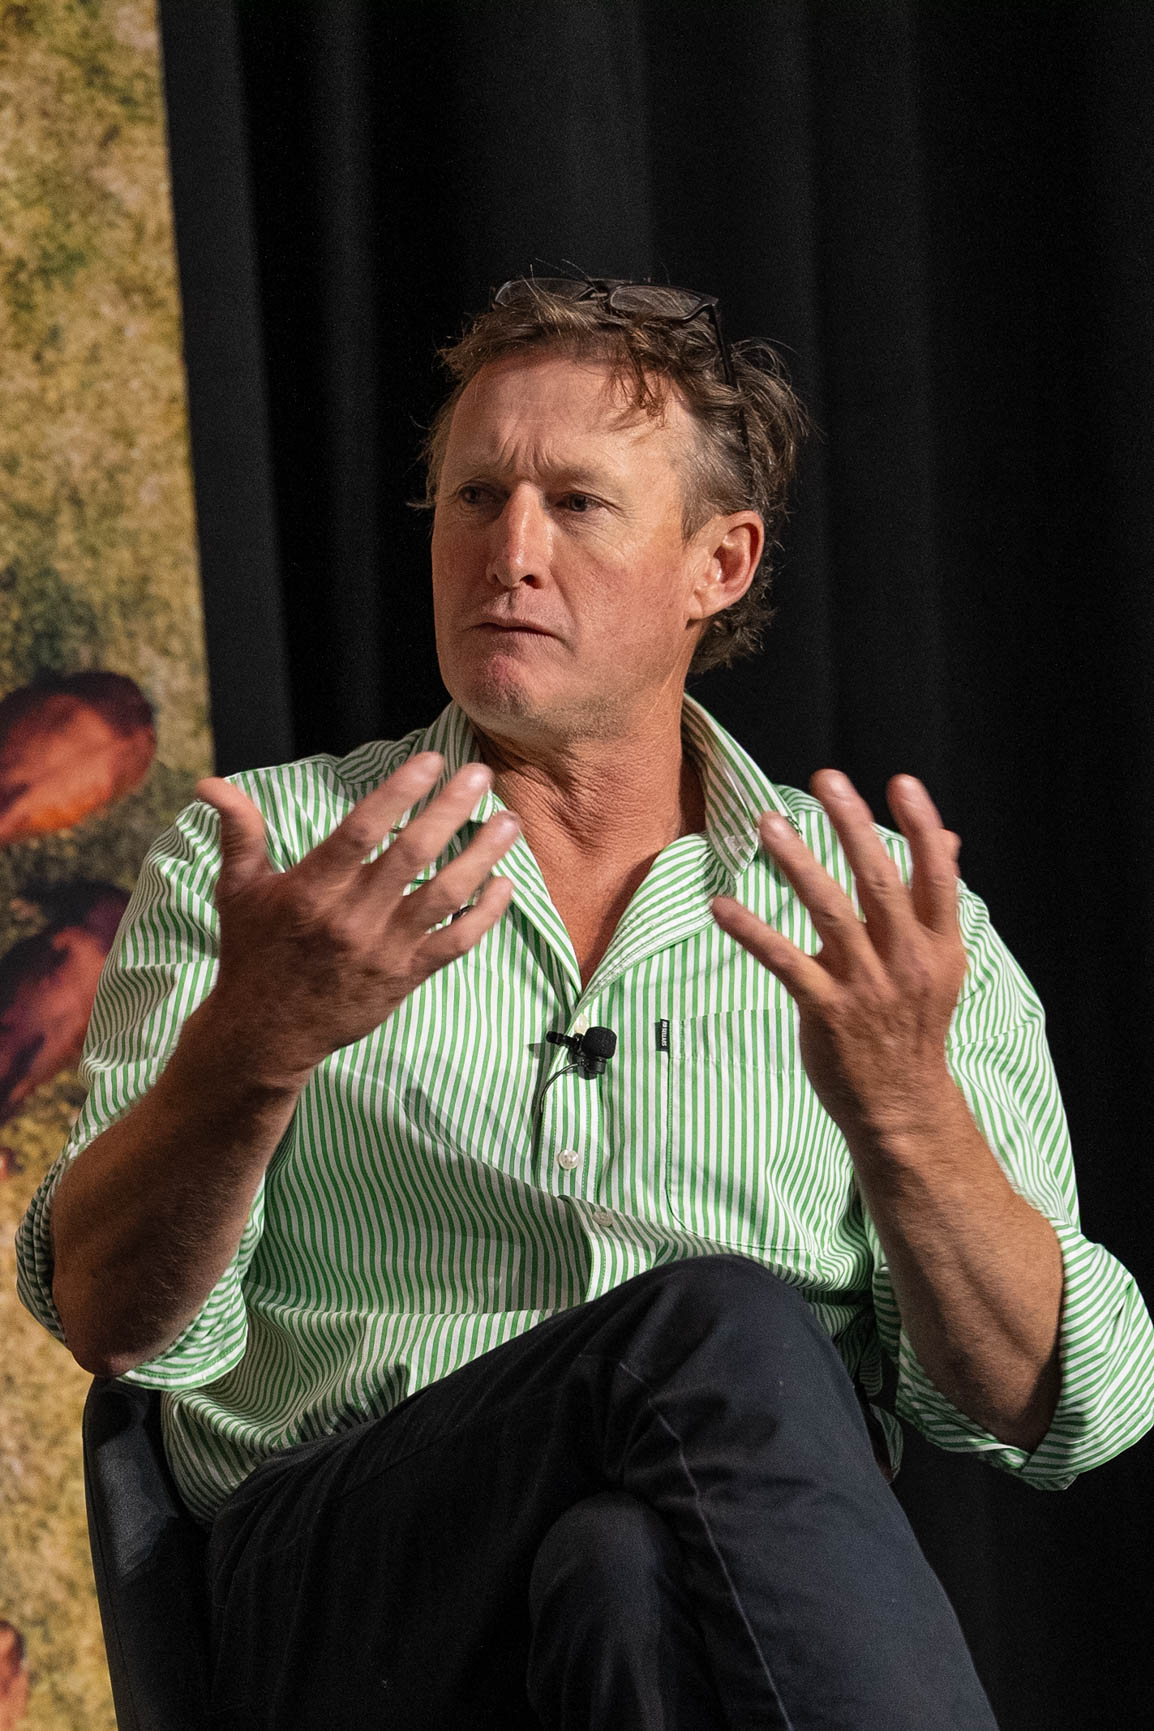 Man wearing a green striped shirt talking on stage and using his hands.